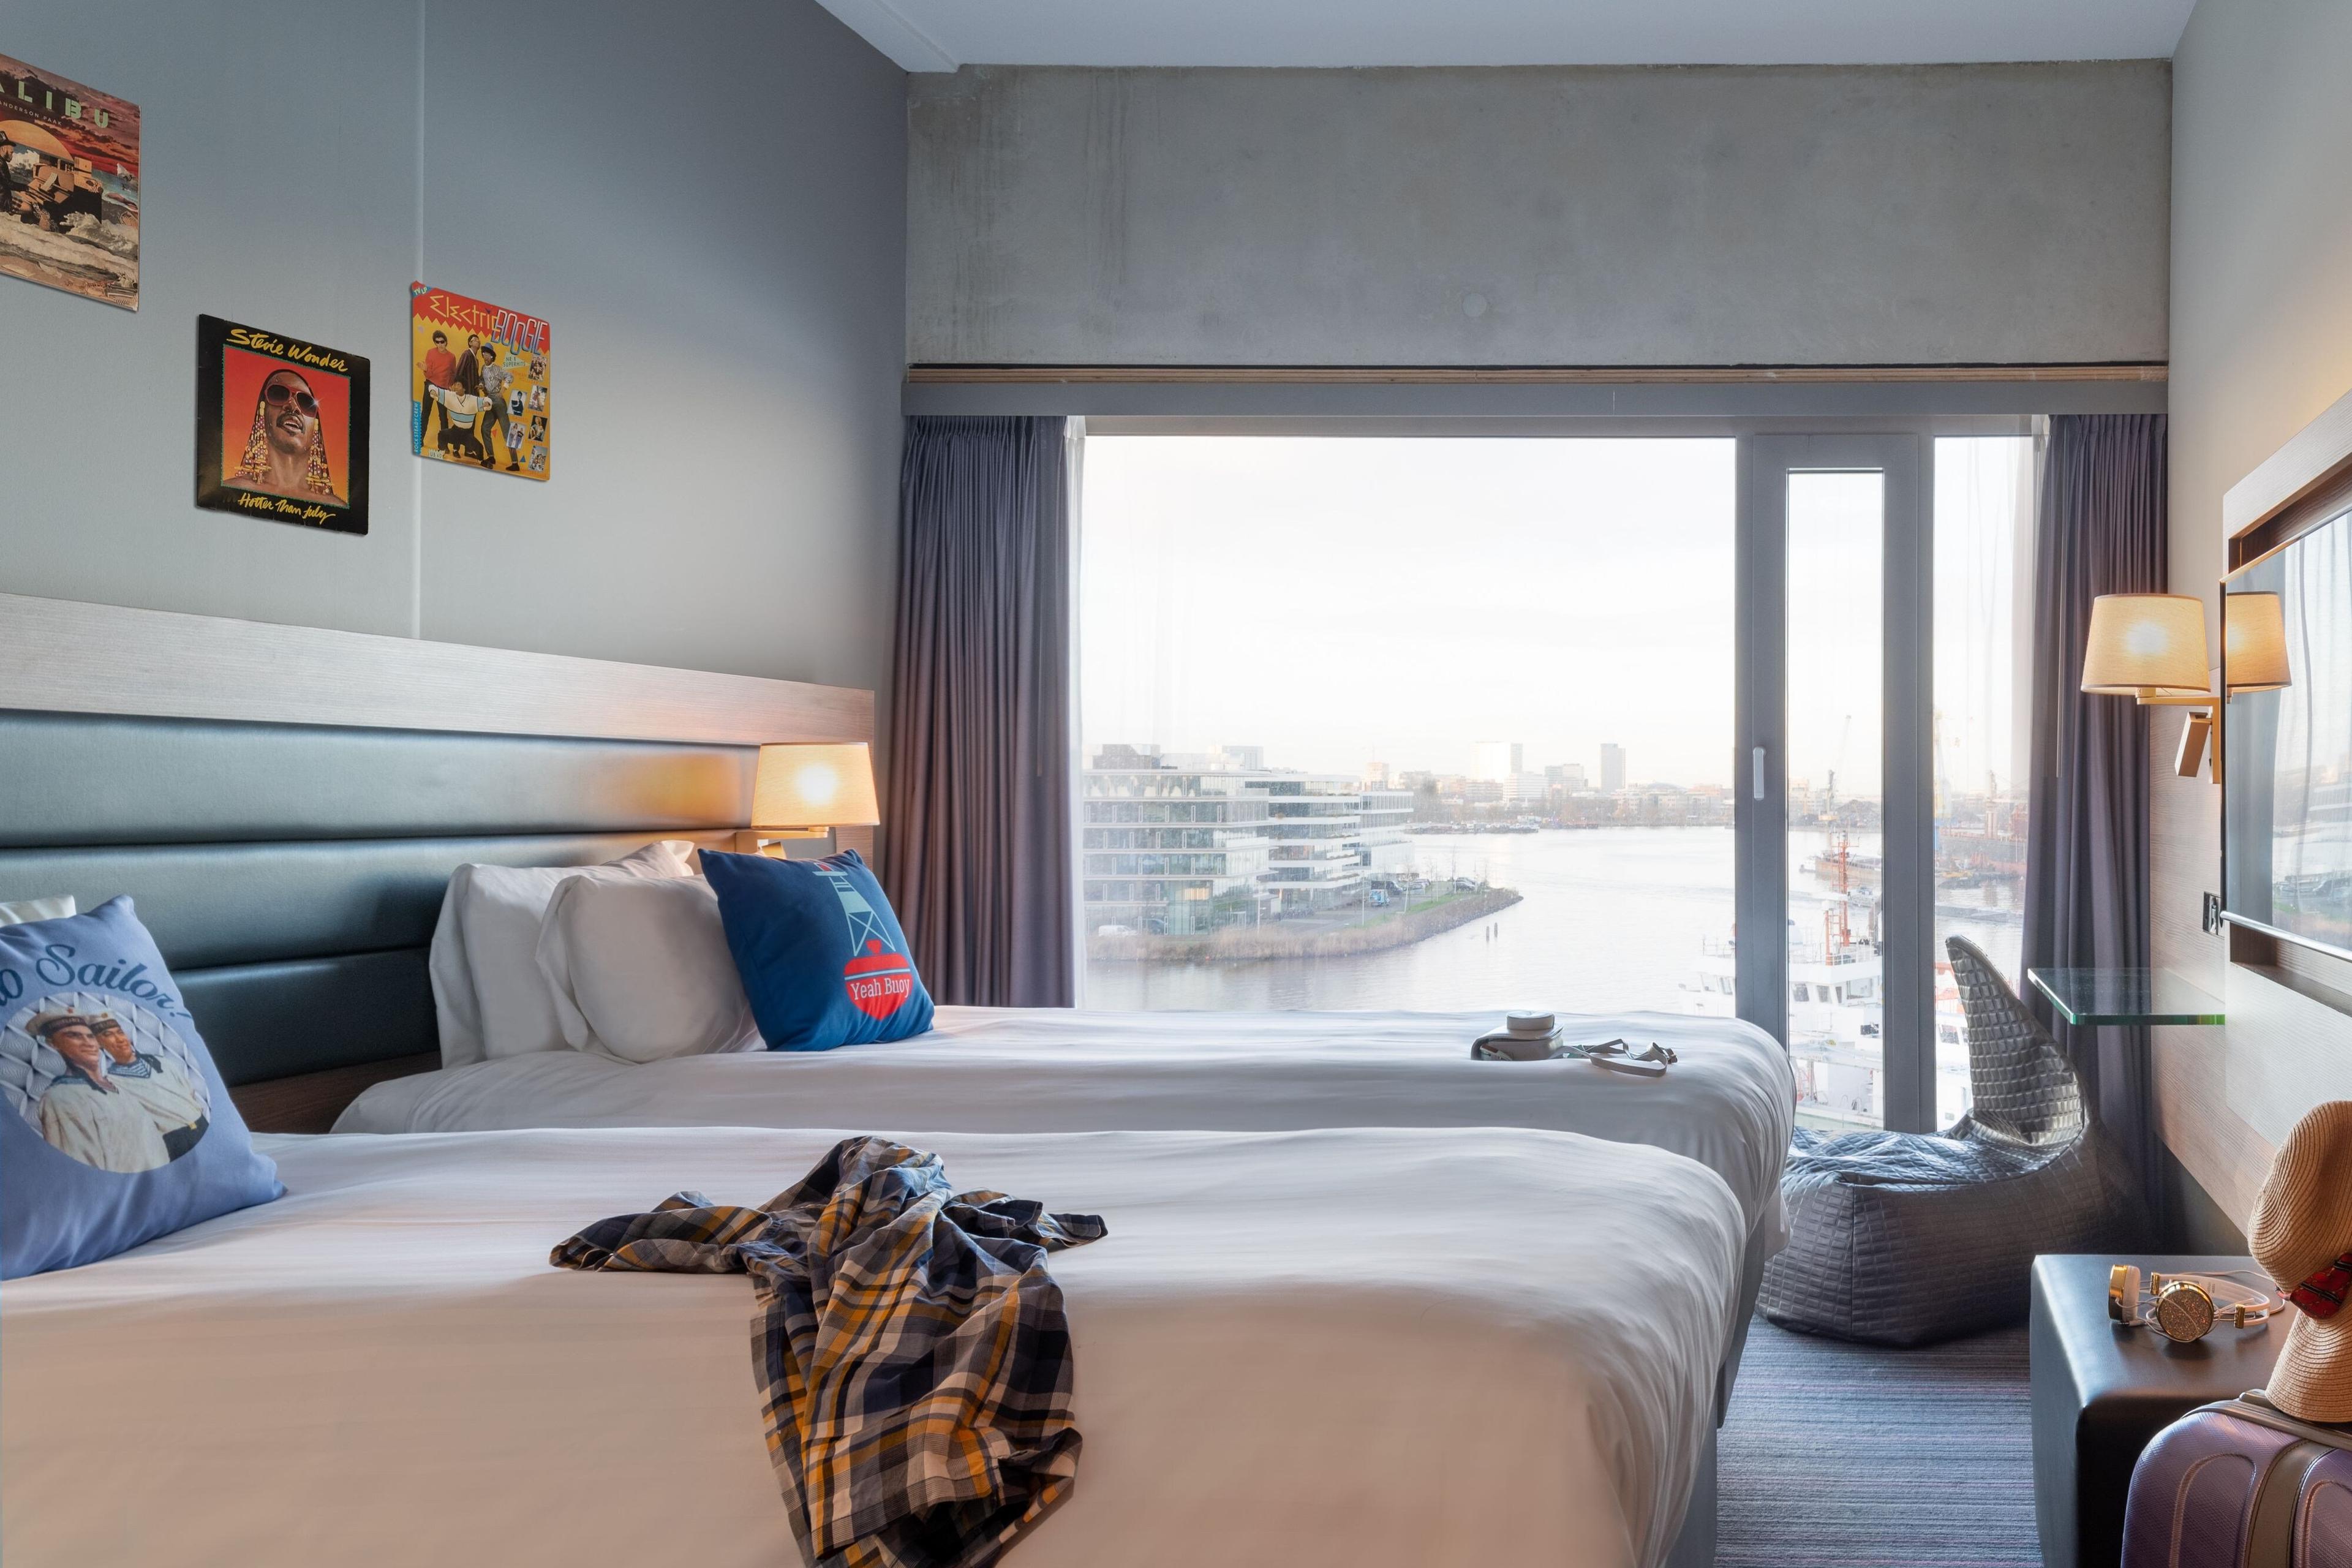 Moxy Sleeper Lookout Twin rooms will leave you stunned with floor-to-ceiling windows overlooking the IJ river and Amsterdam's western port.